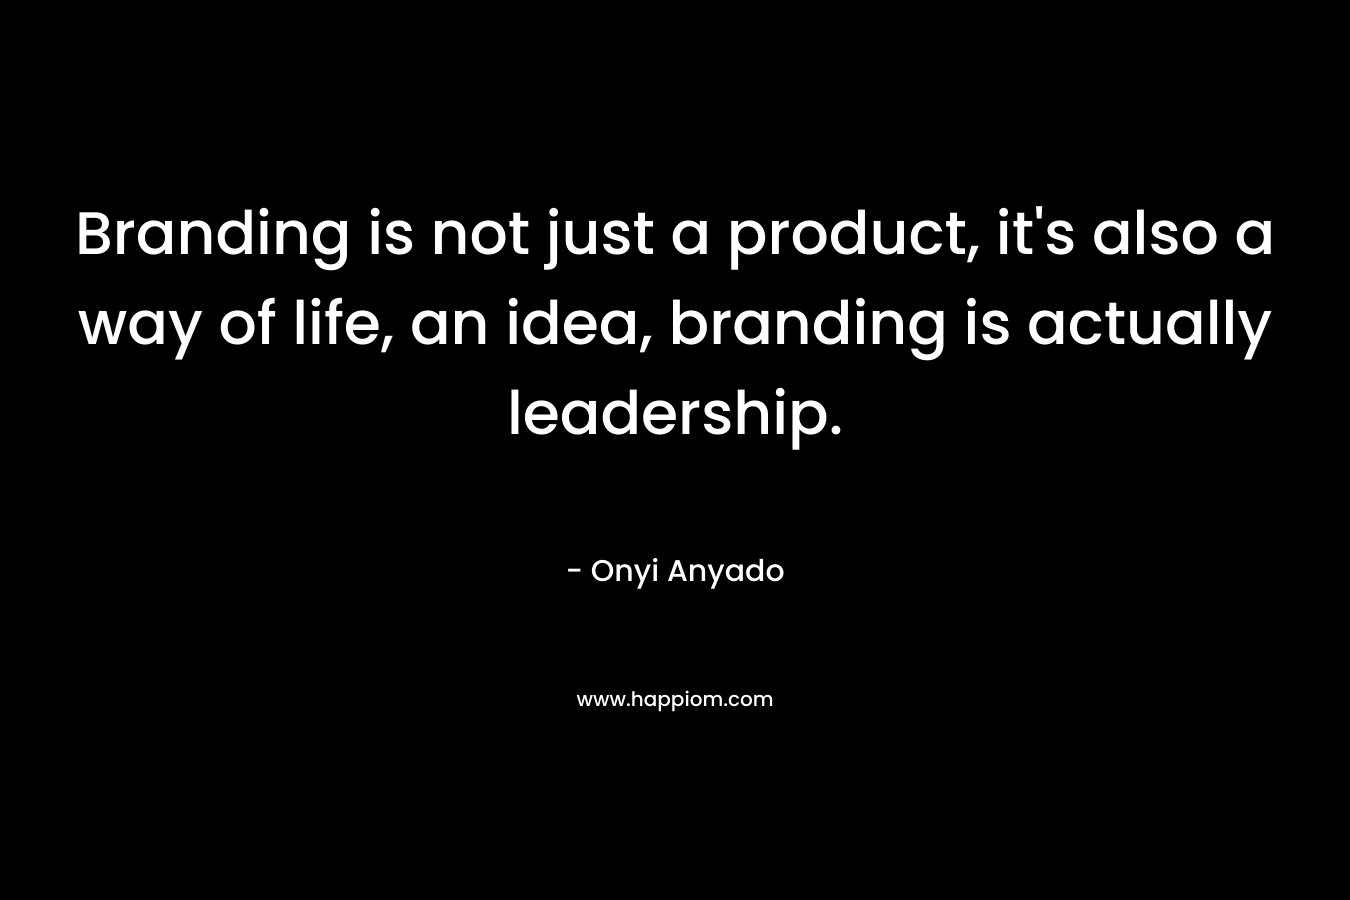 Branding is not just a product, it’s also a way of life, an idea, branding is actually leadership. – Onyi Anyado